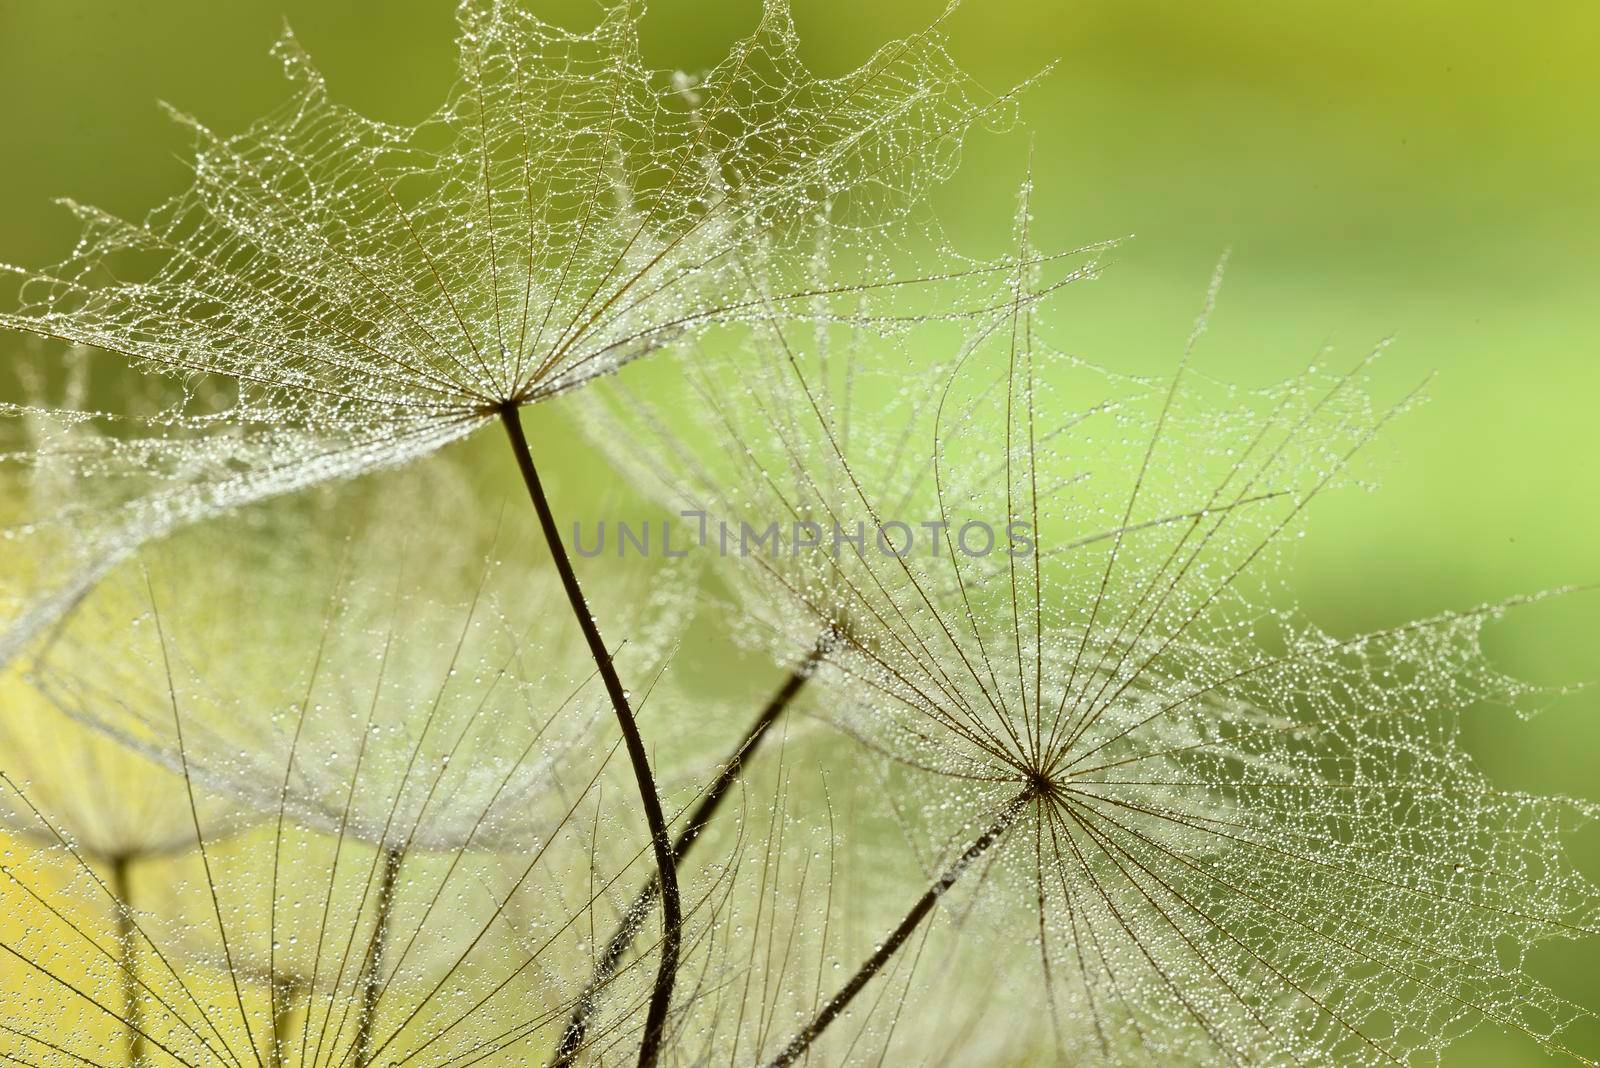 Winged seeds of dandelion head plant with dew drops by AlessandroZocc